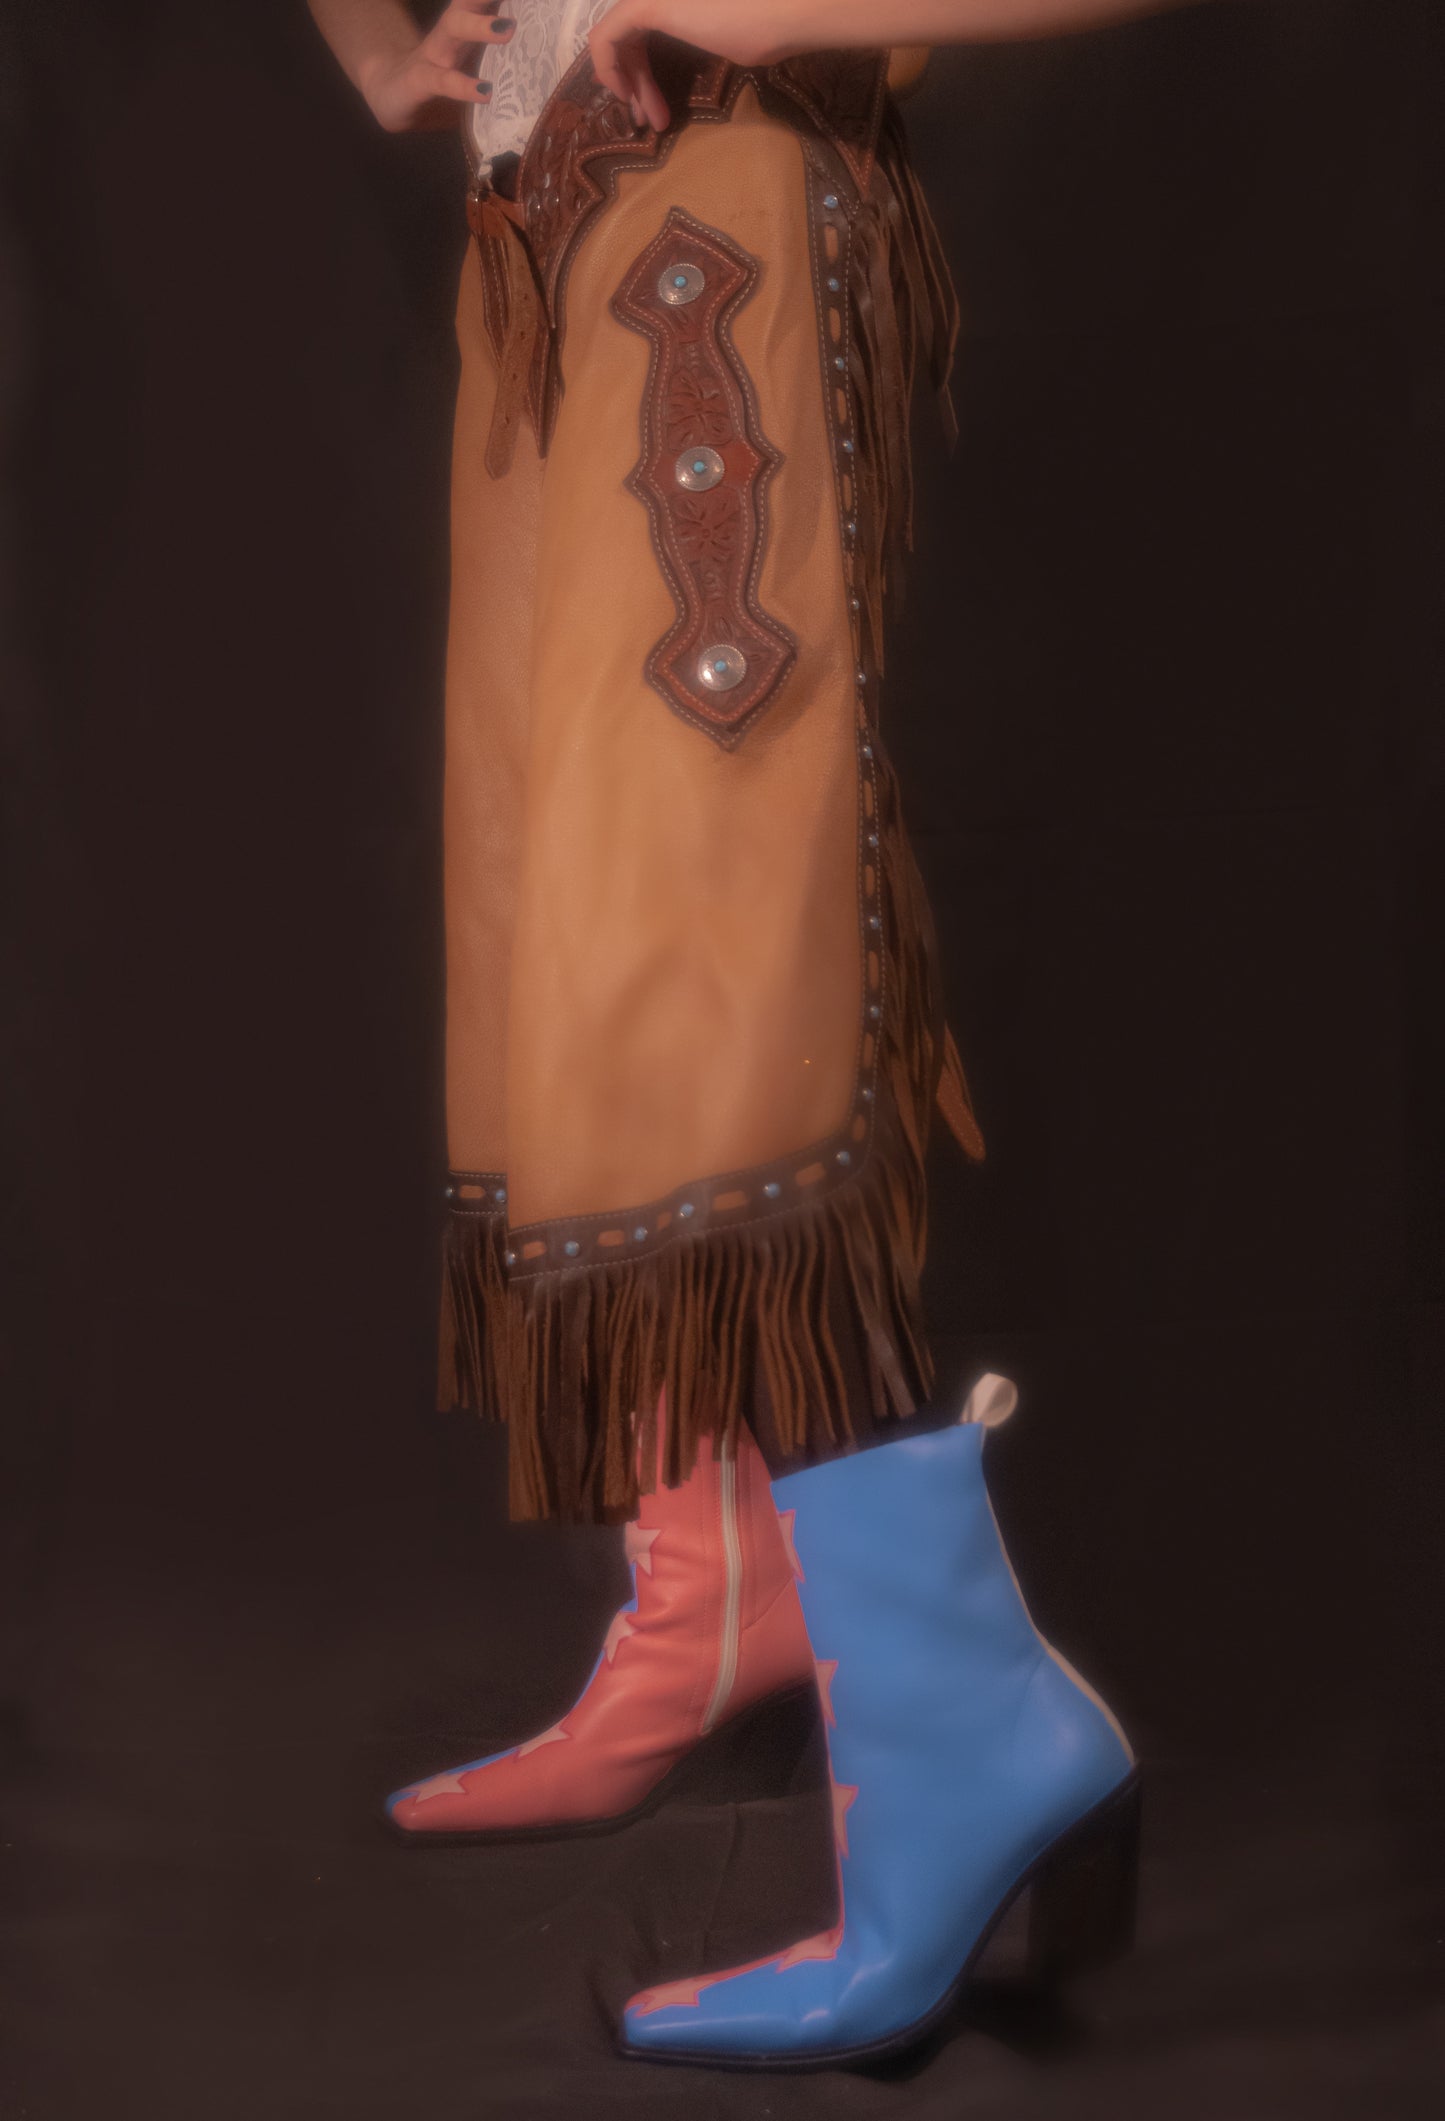 “Texas hold-me” western-style boots